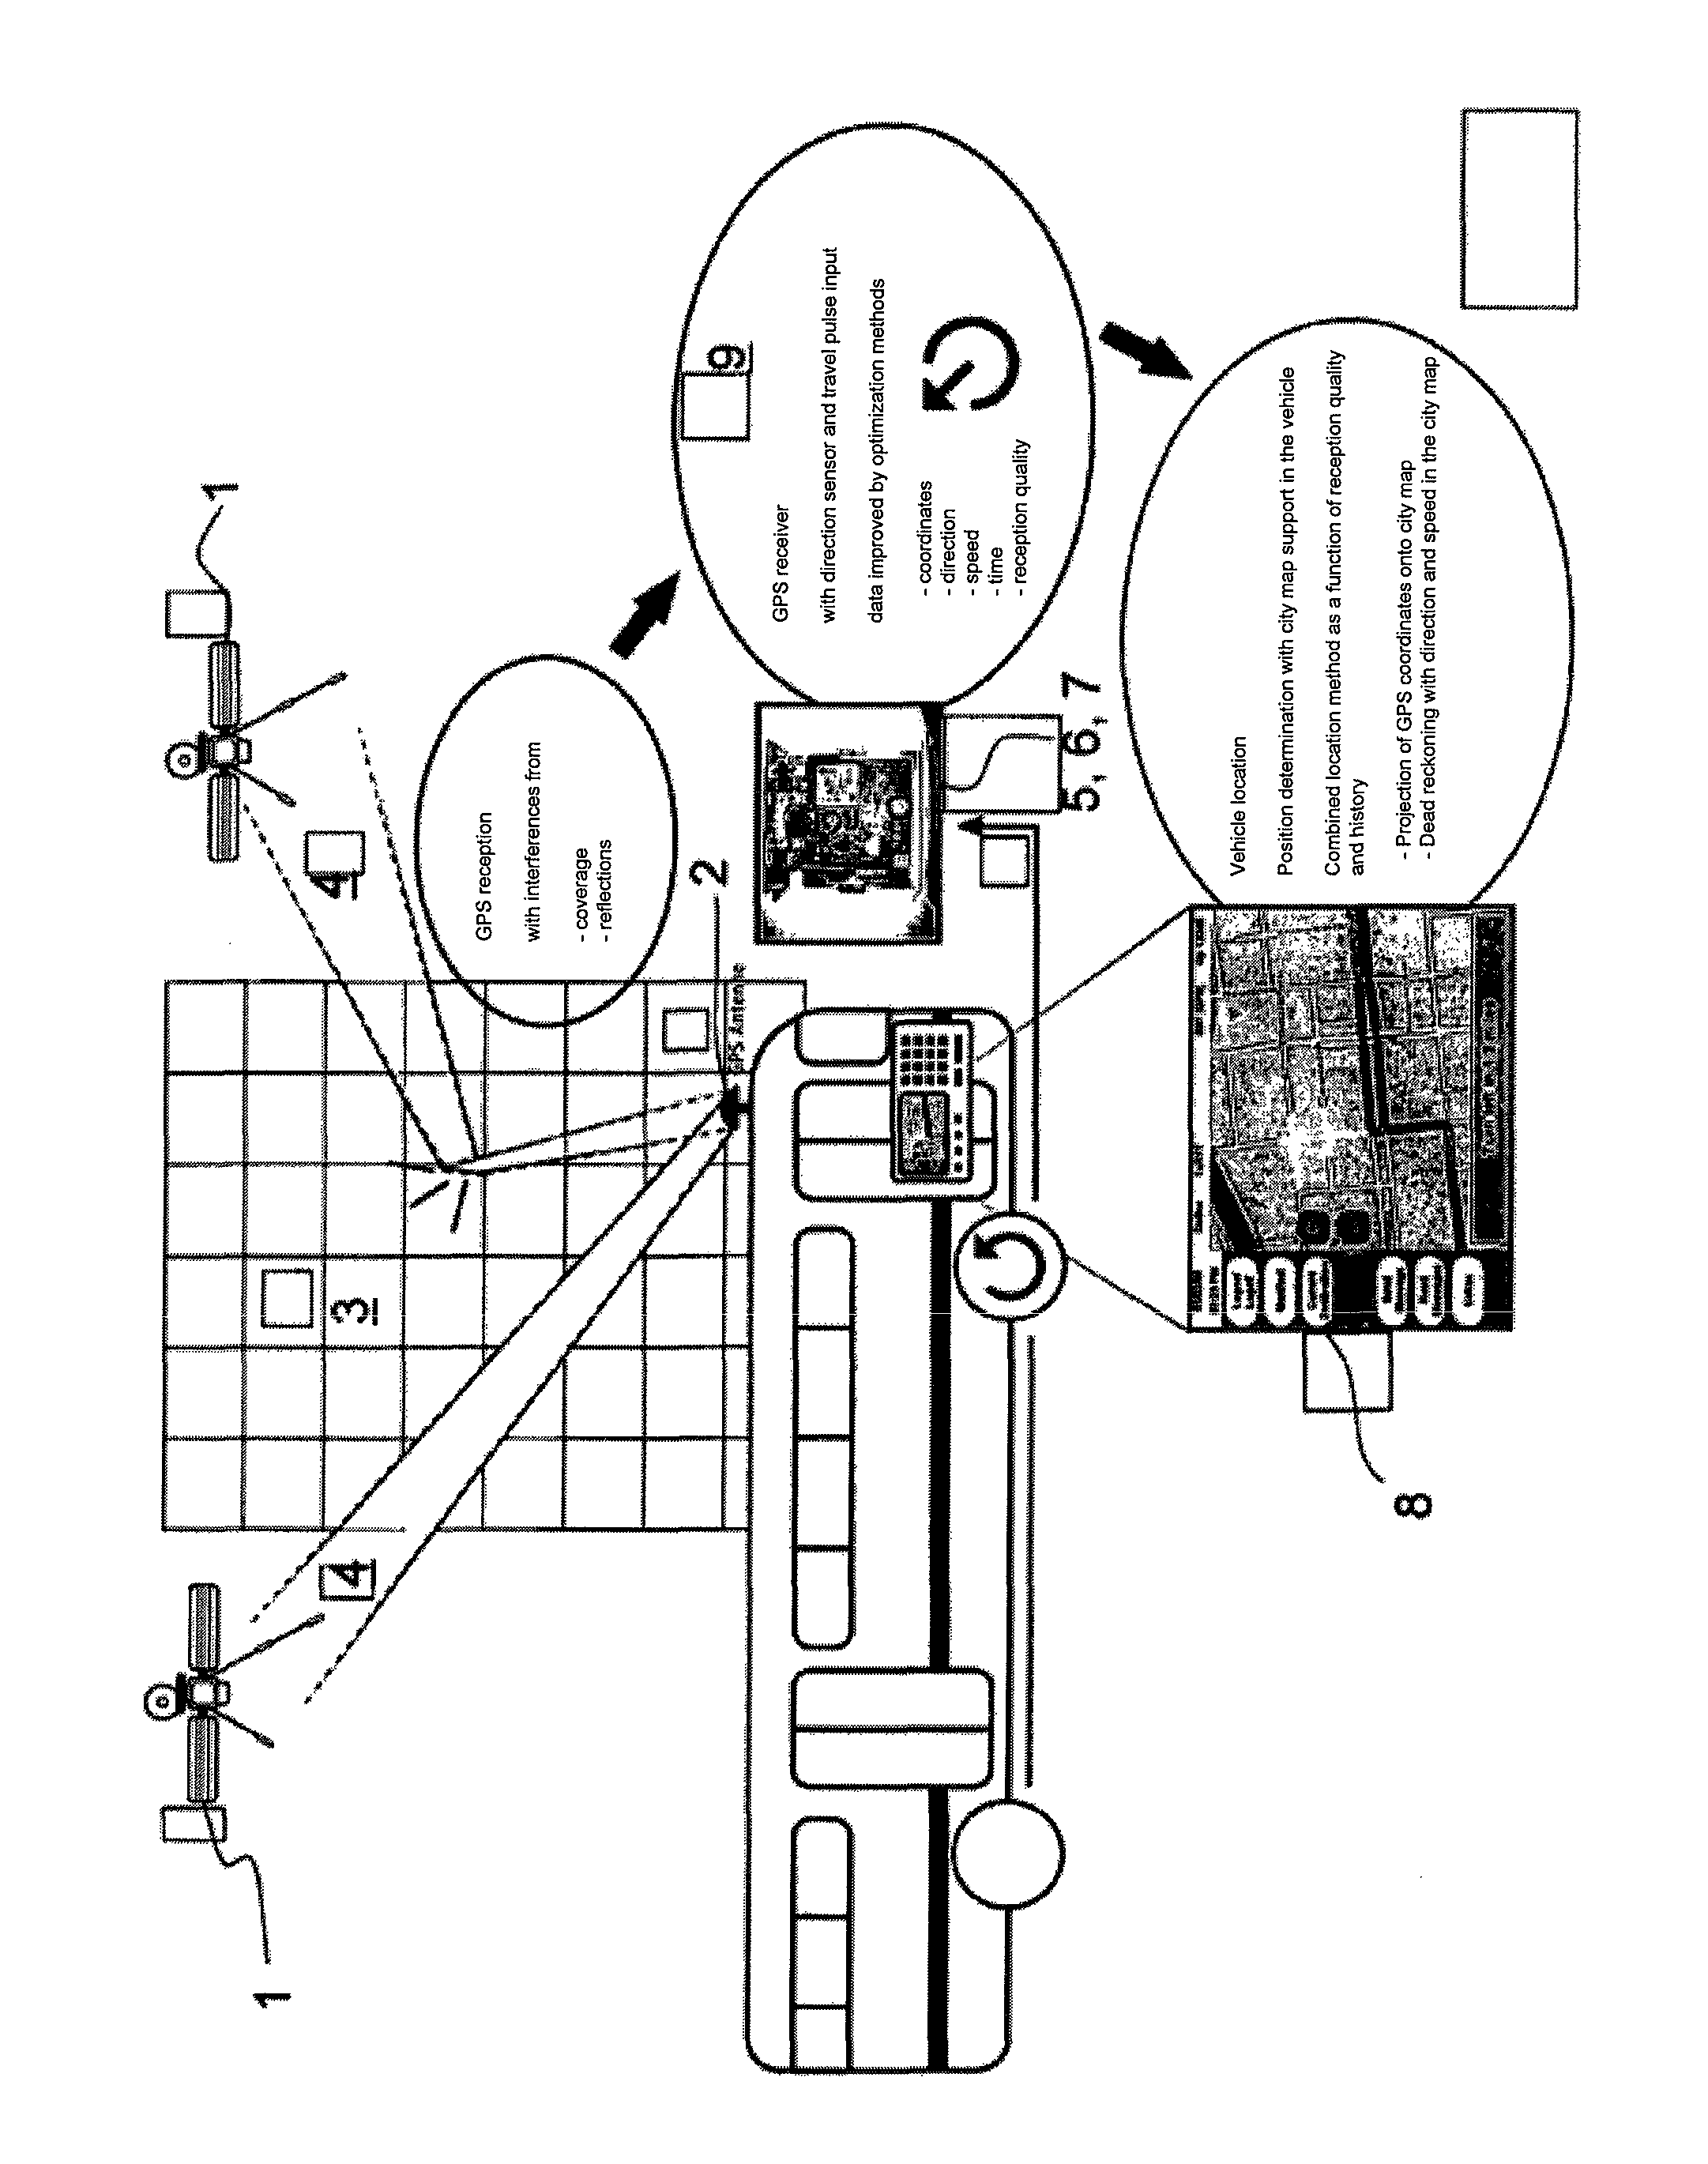 Method and device for determining the location of a vehicle